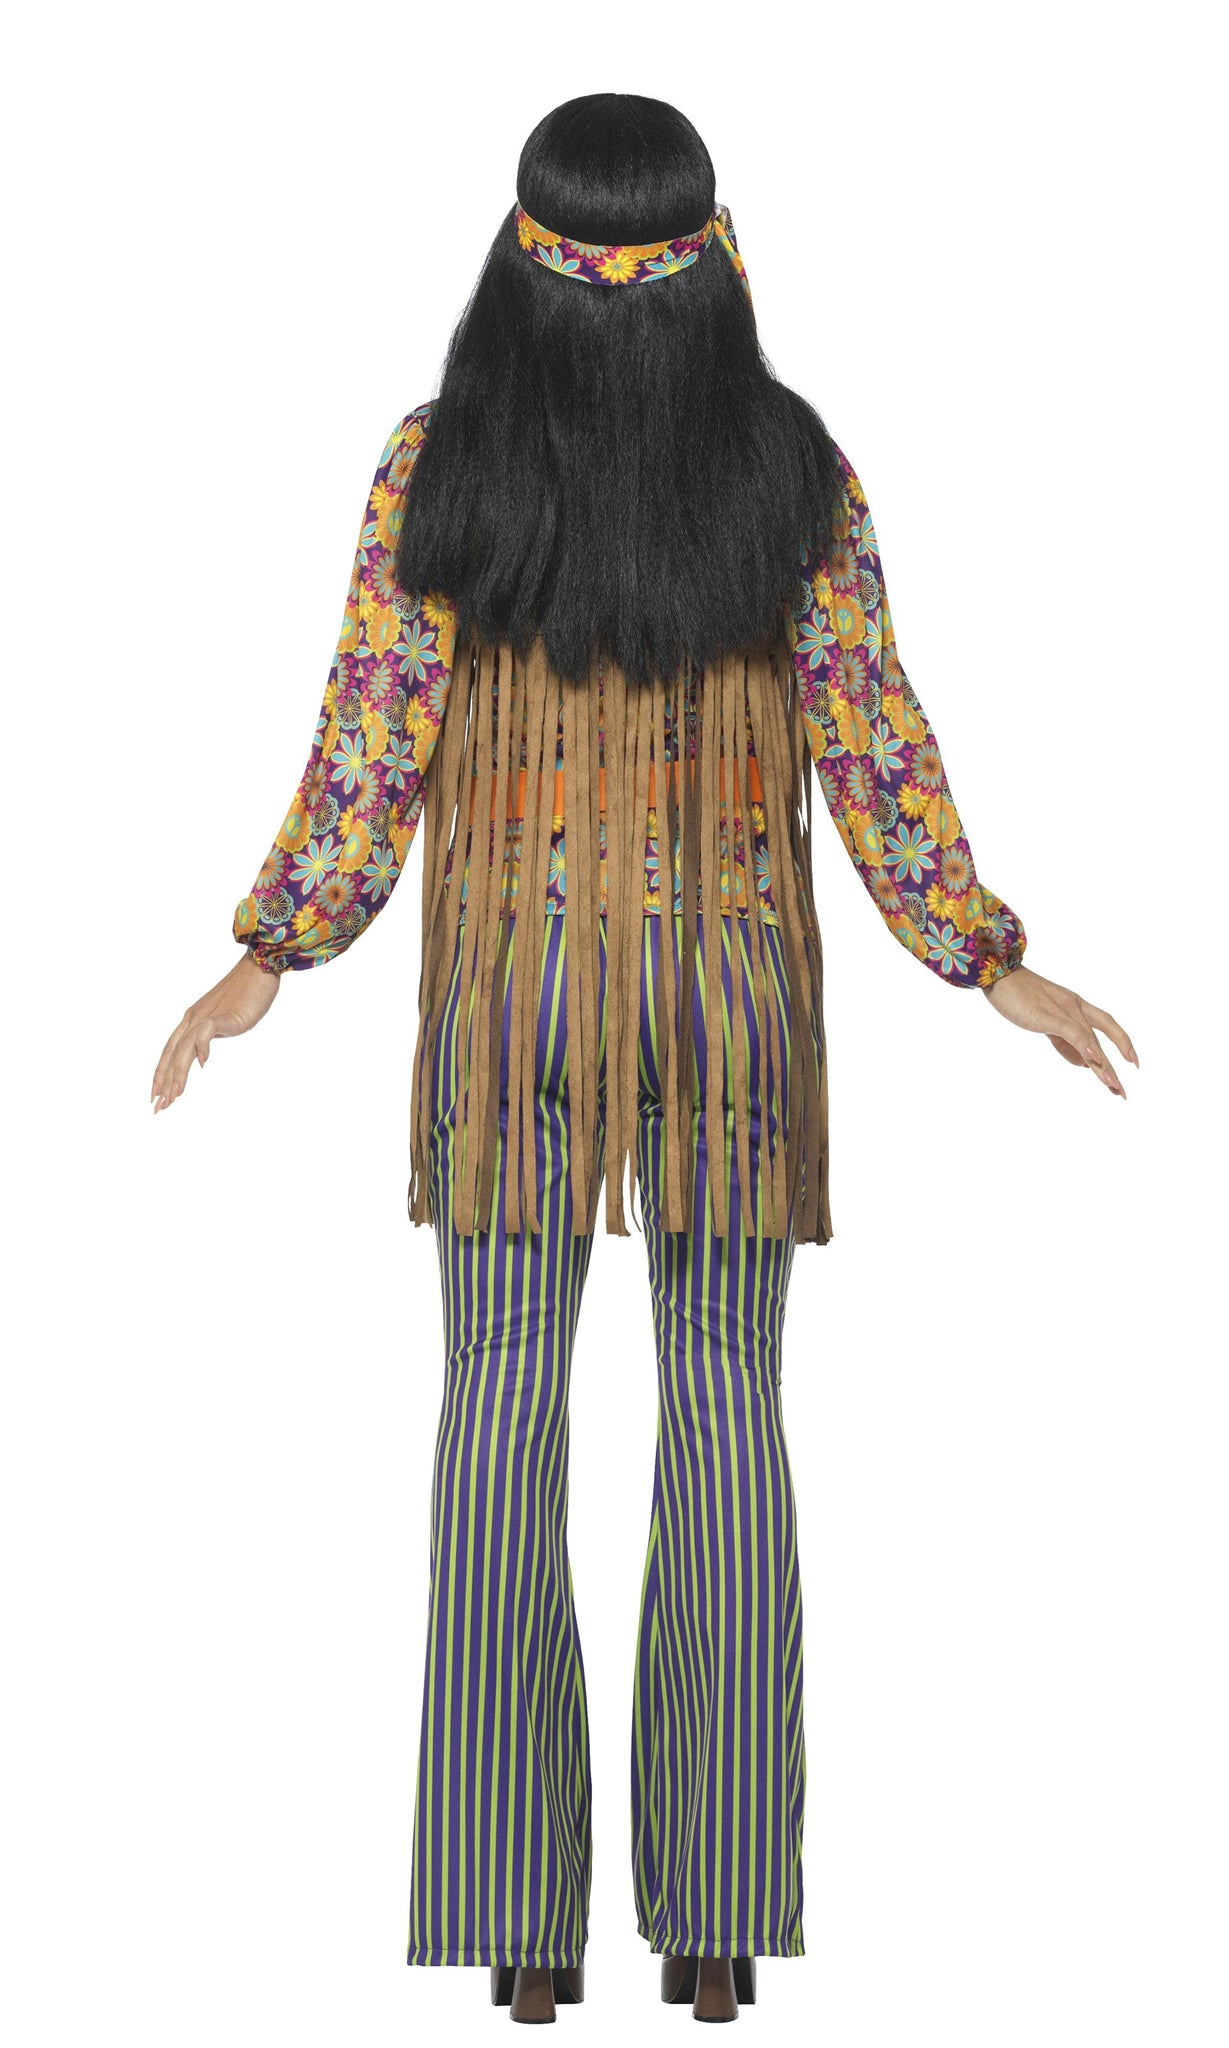 Back of 60s Cher flower pattern top with brown tassels with headband and striped flares